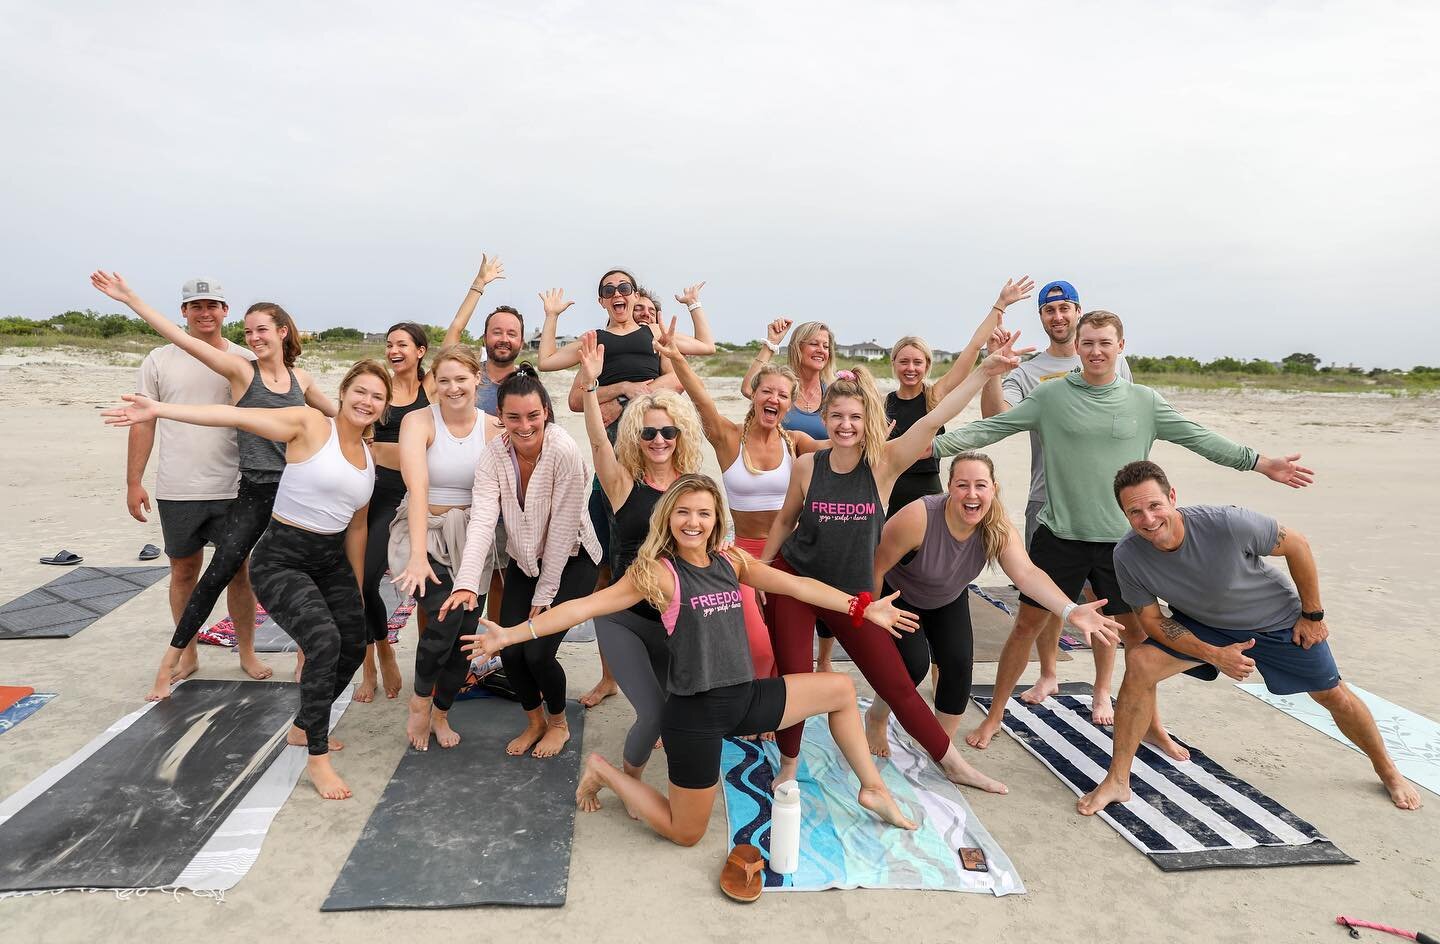 It&rsquo;s that time of year again&hellip;. BEACH WORKOUTS are BACK 🤩

Join us Saturday May 20th at 9AM on Sullivans Island for a MEET THE TEAM beach workout followed by a beach HANGOUT all day!

Bring your friends, family, children, coworkers, and 